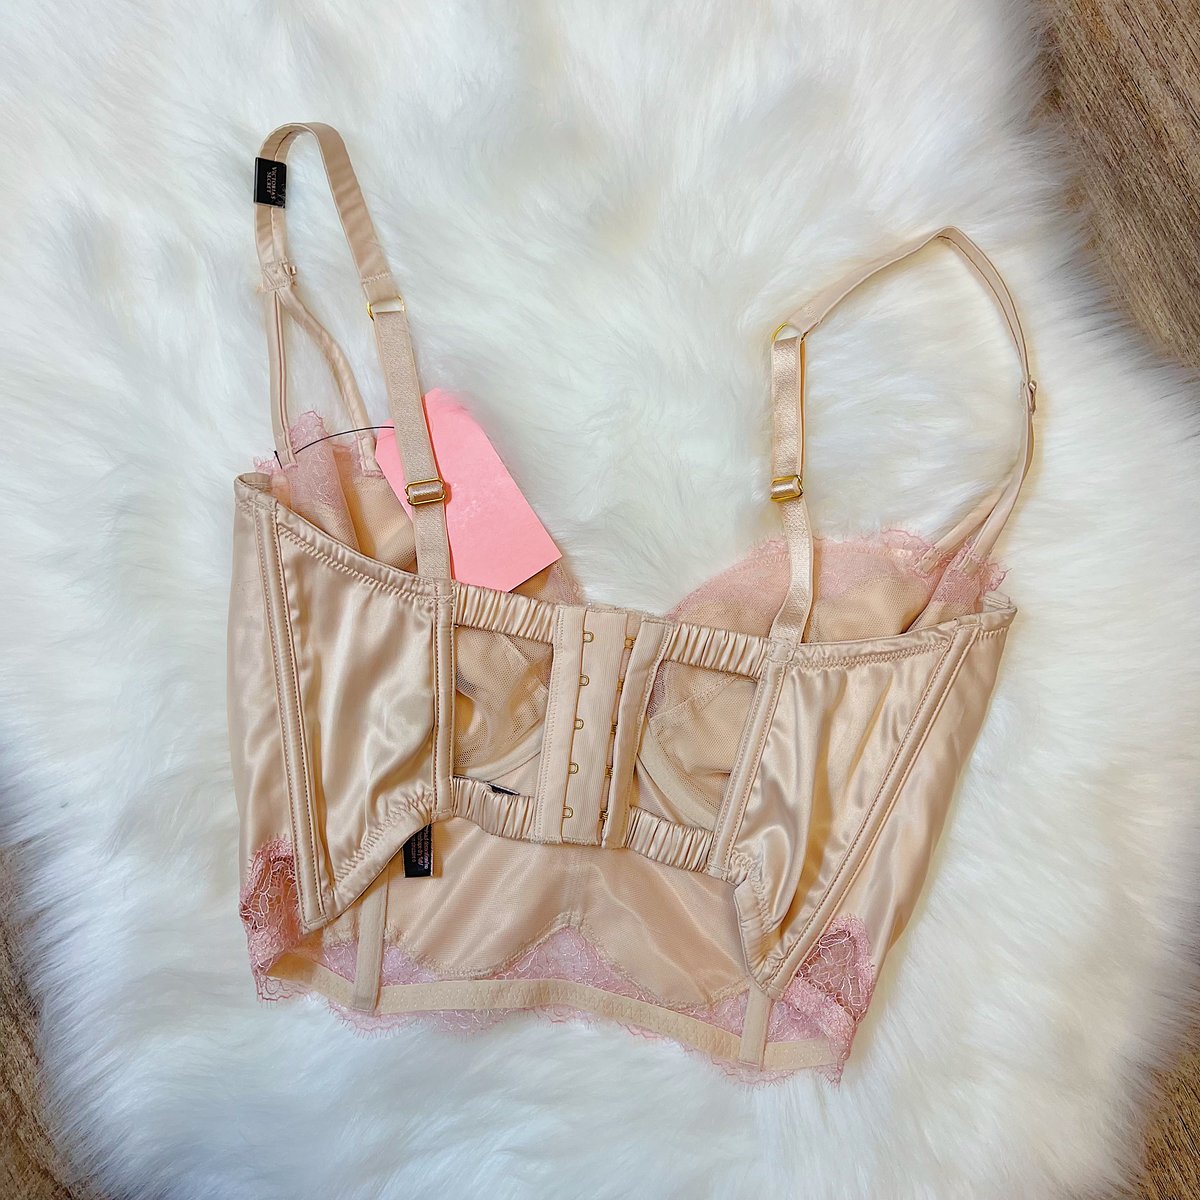 Victoria's Secret 34D Bombshell Strappy Longline Size undefined - $81 -  From Shoptillyoudrop